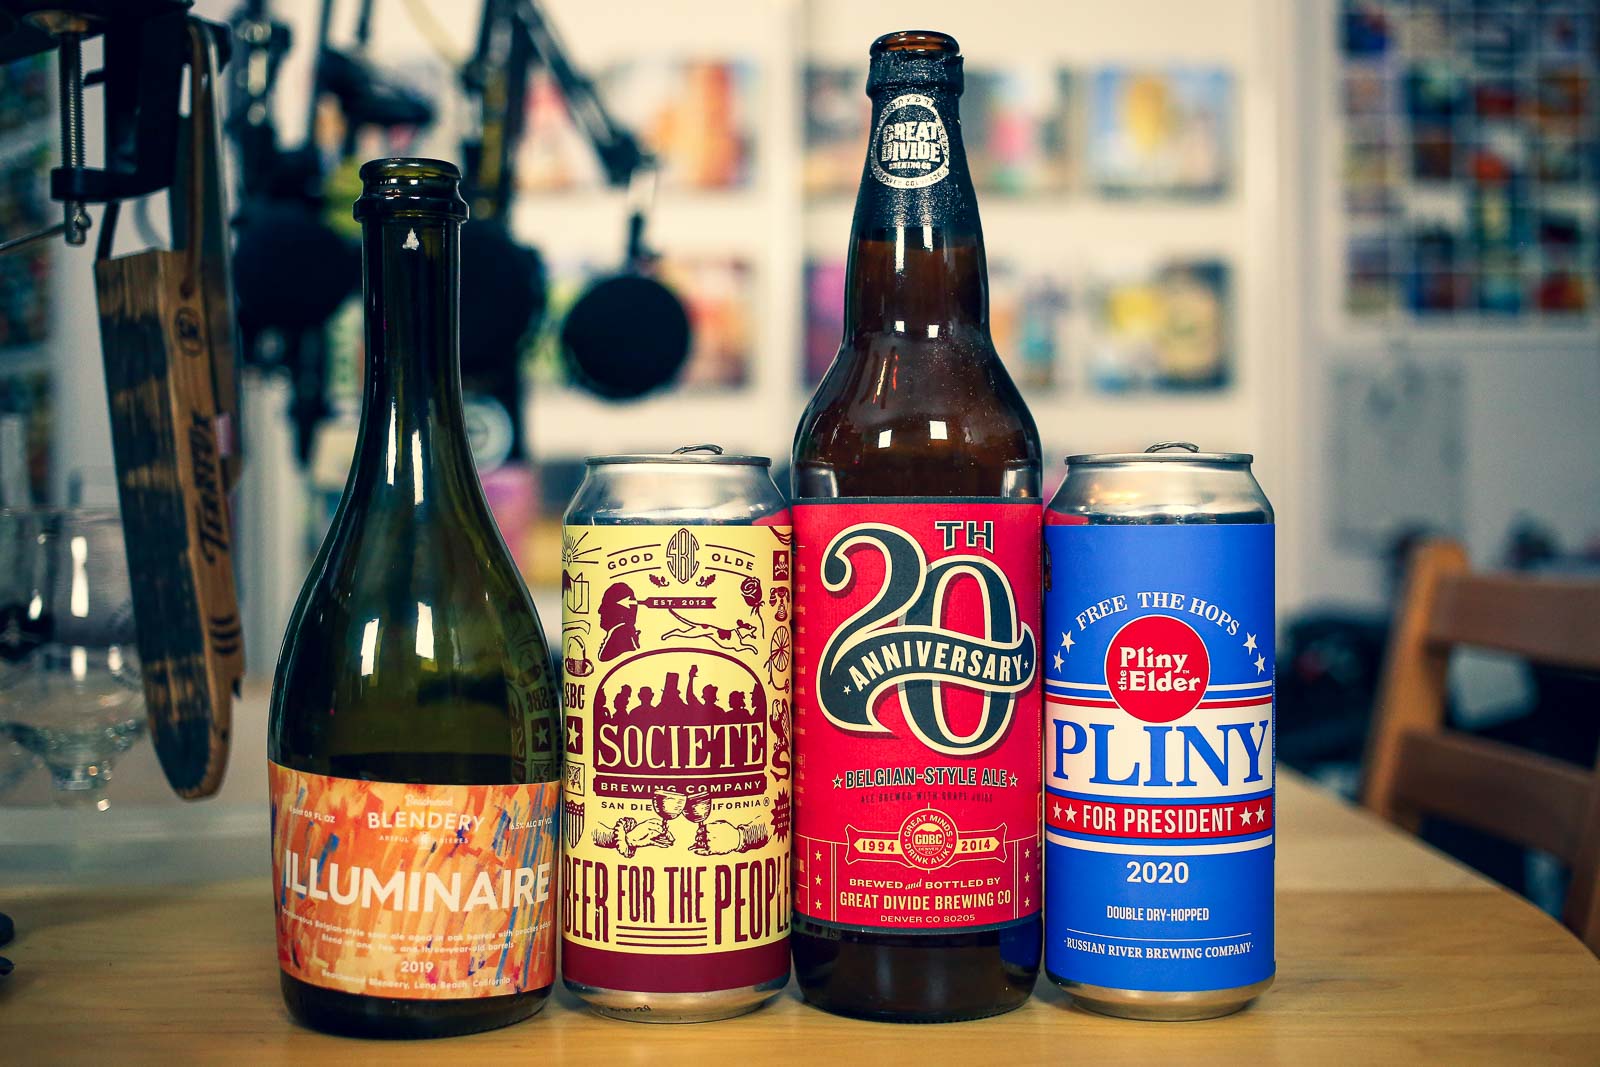 Pictured: John's beers from episode 299.